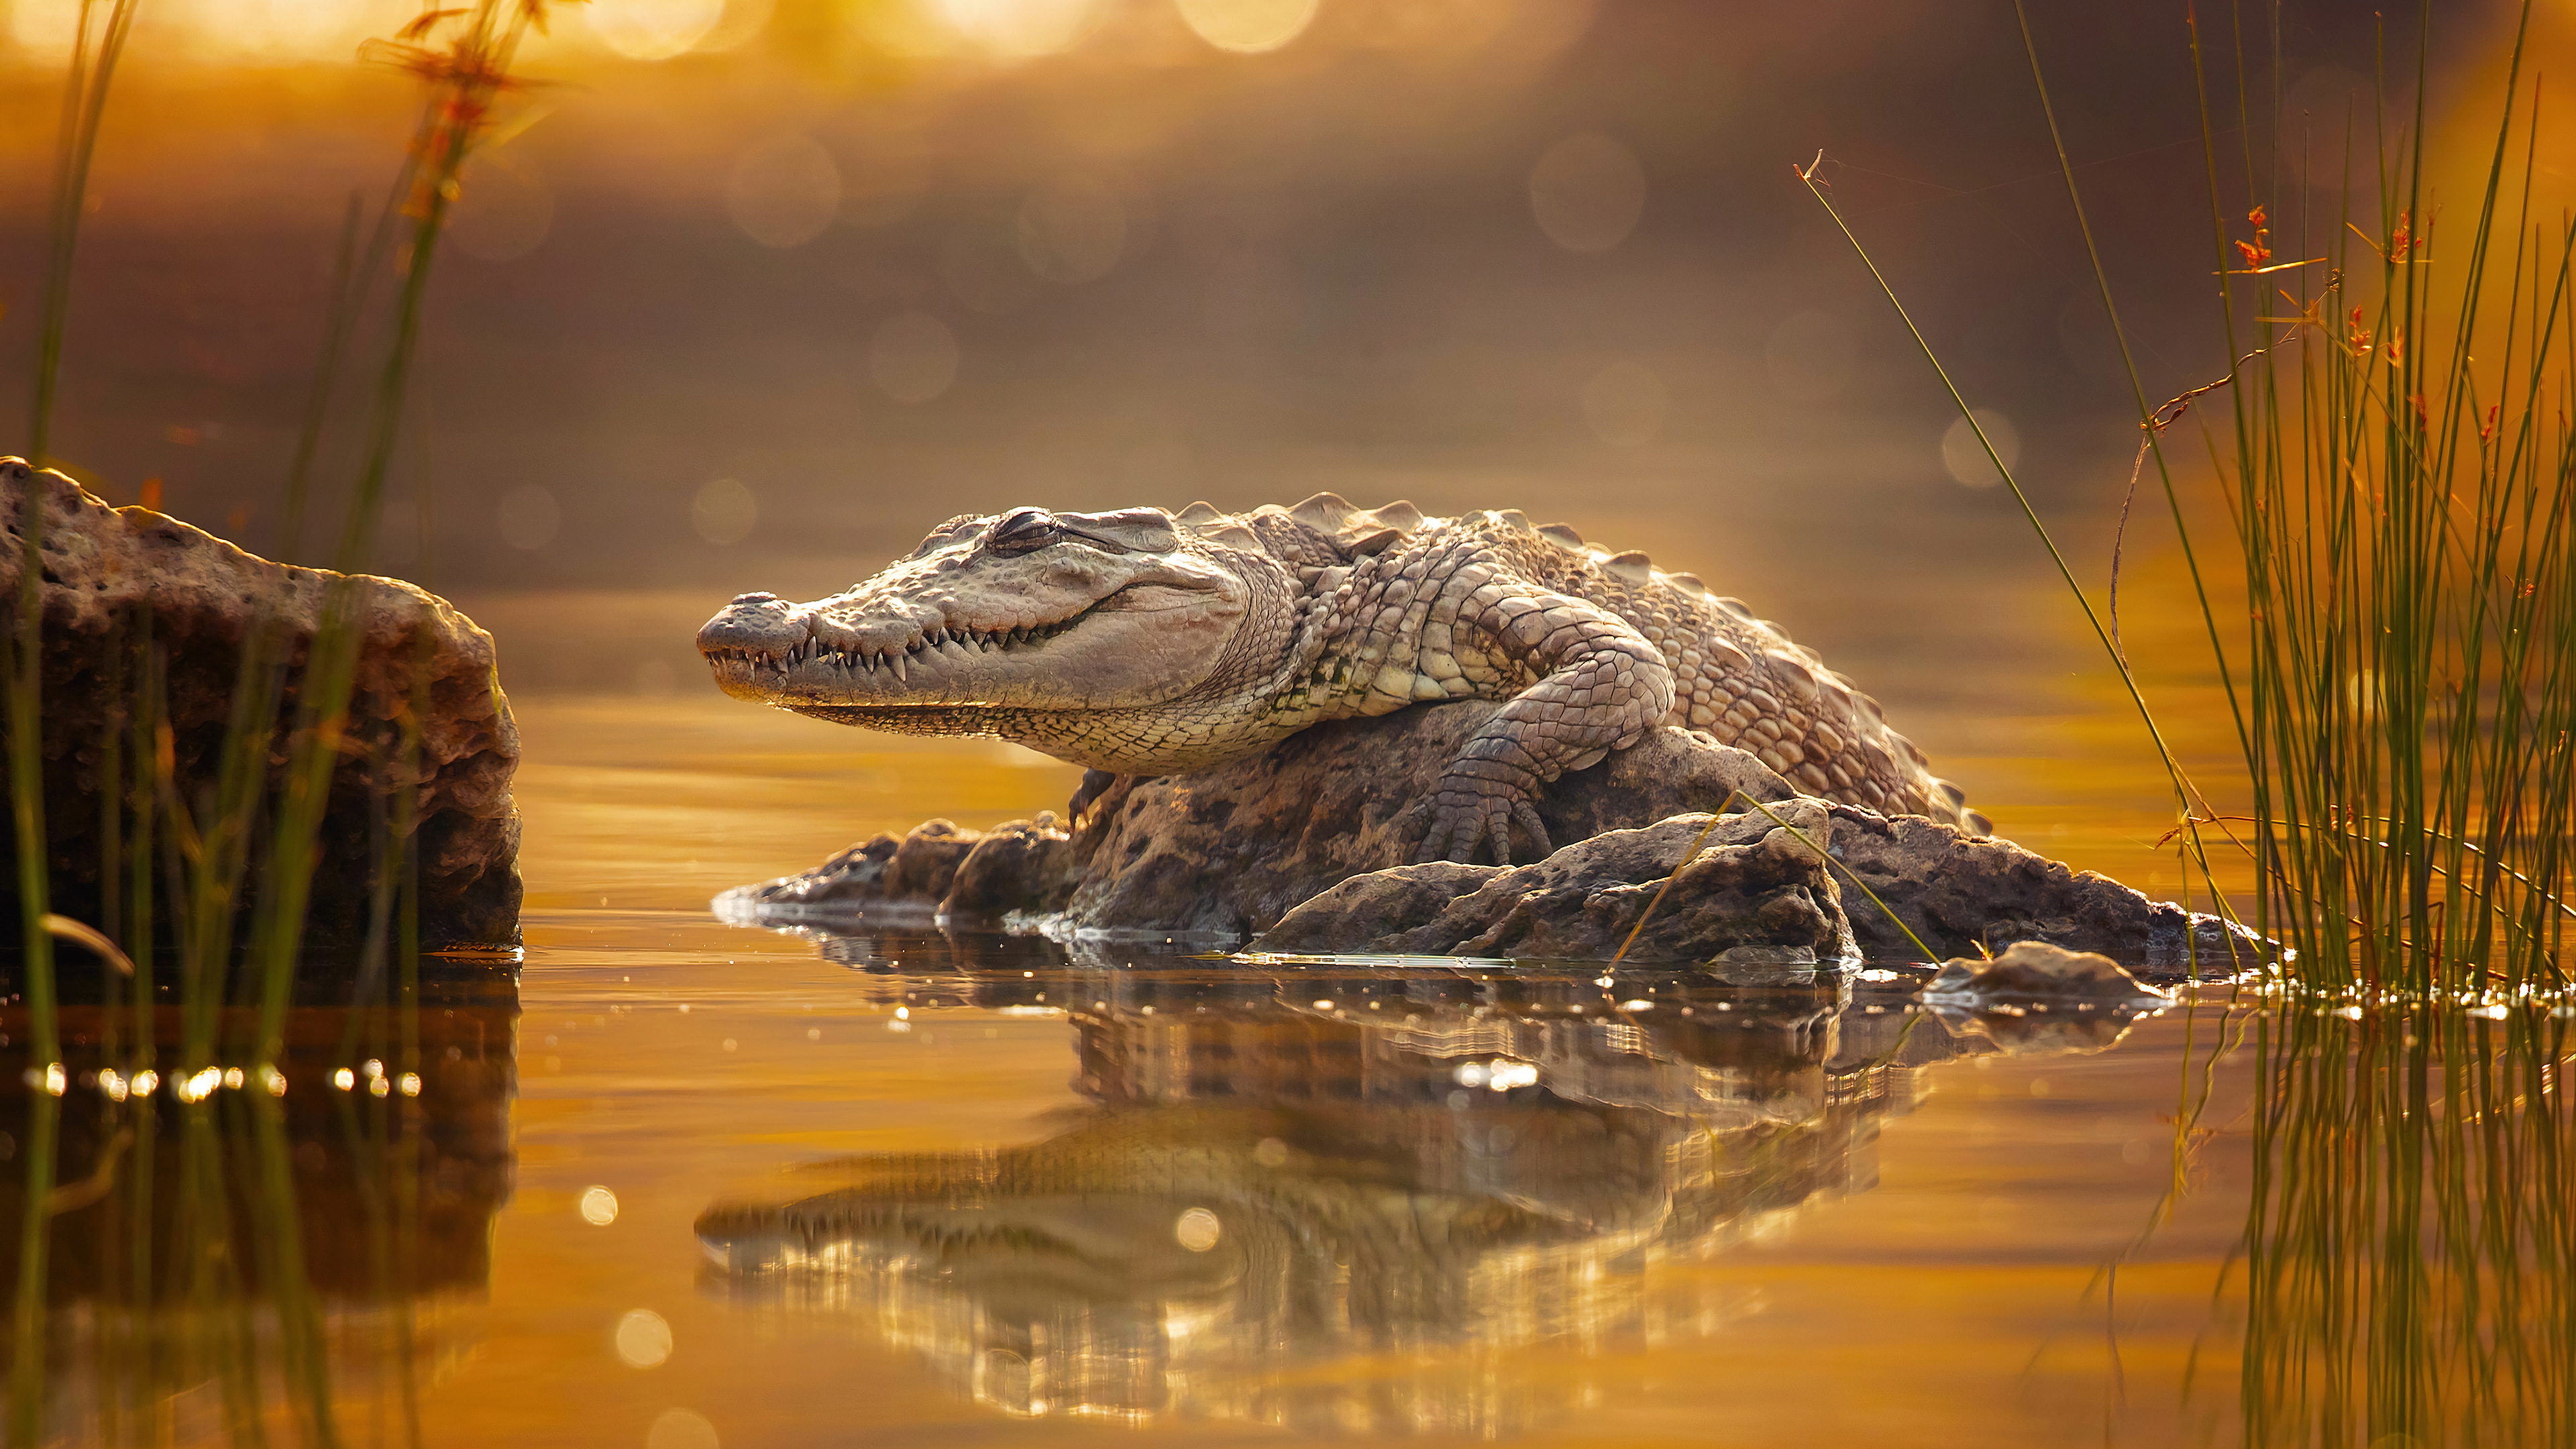 Crocodile Photos, Download The BEST Free Crocodile Stock Photos & HD Images